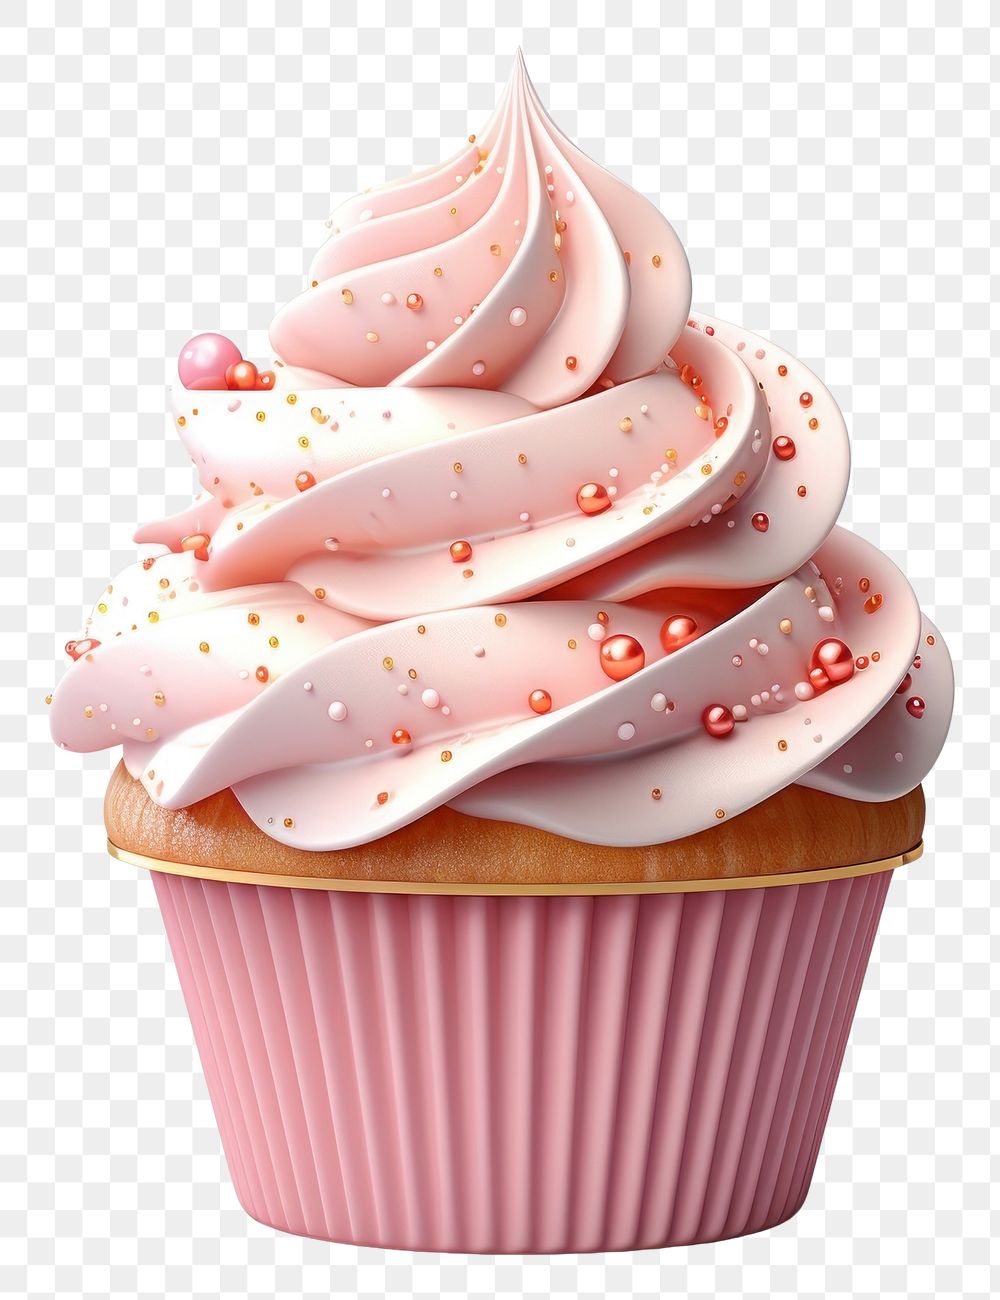 PNG Cute frosting cream cupcake dessert icing food.